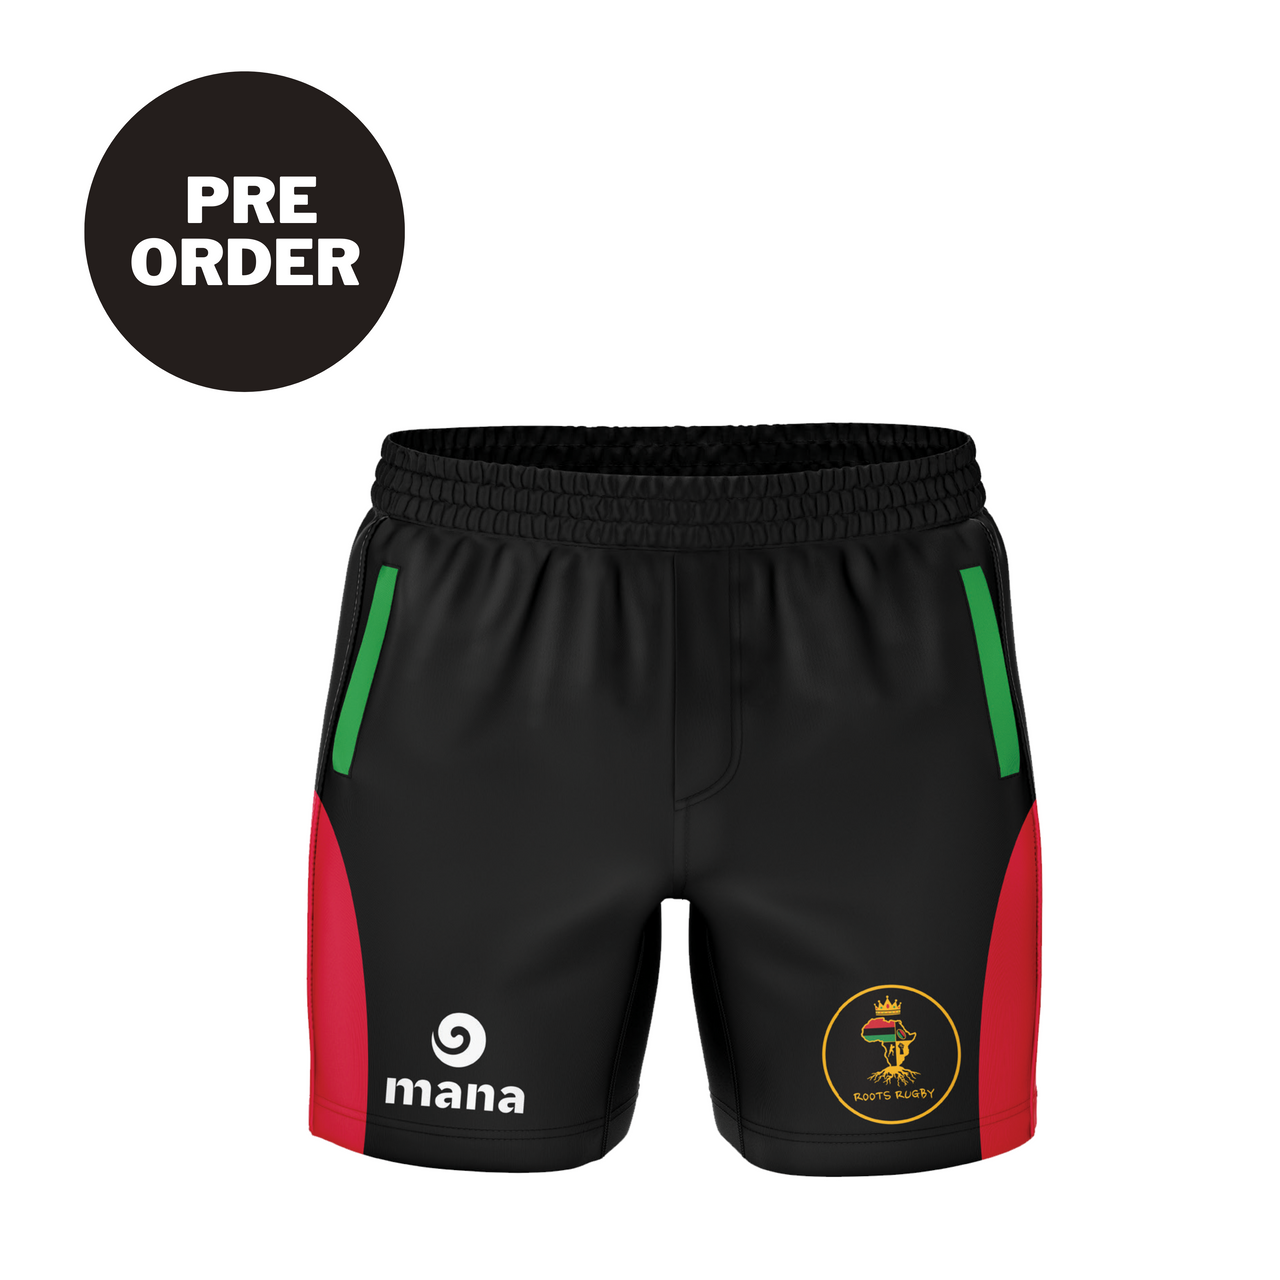 ROOTS Rugby Gym Shorts